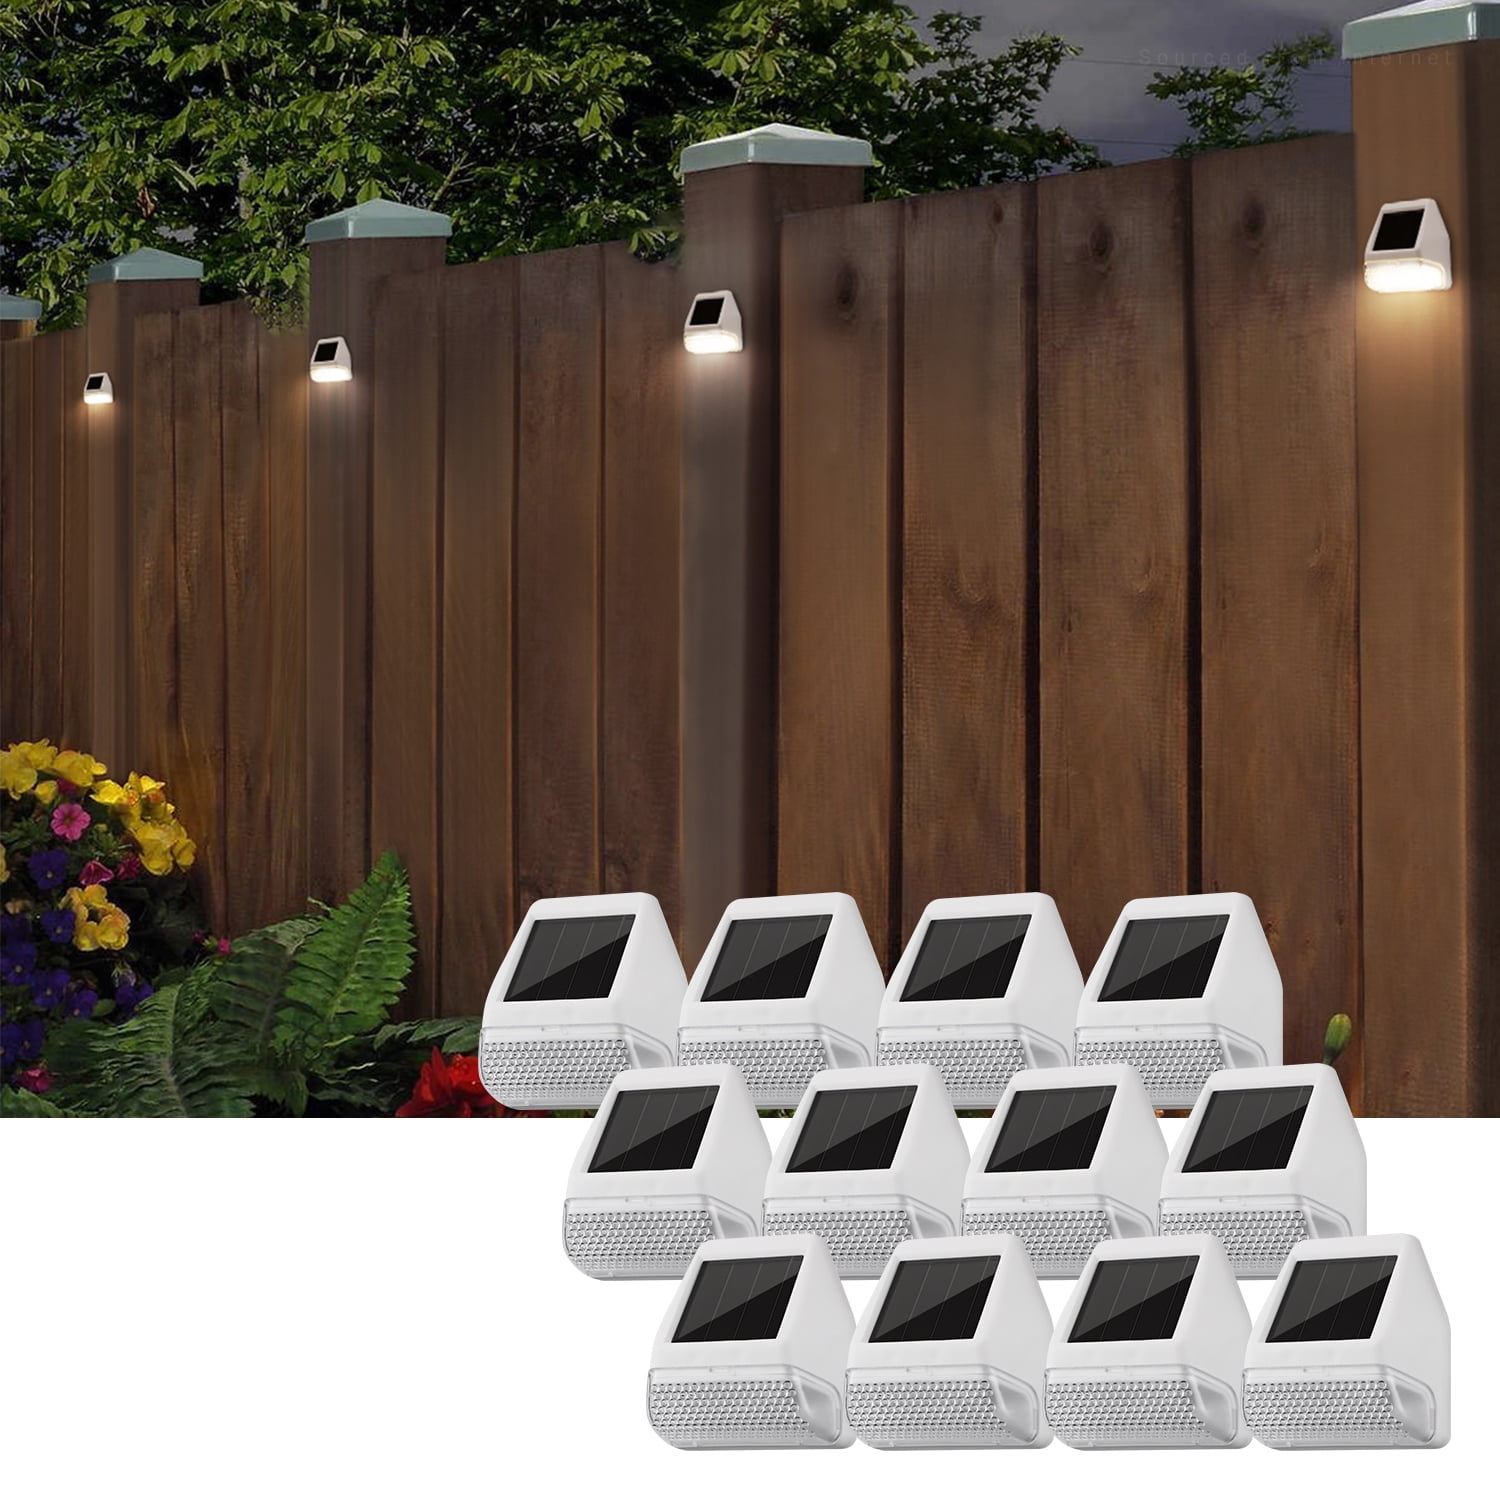 TORCHSTAR 12-Pack Solar-Powered LED Fence Light for Outdoor, Patio, Backyard, White Dusk-to-Dawn Deck Lights, 90° Beam Angle Post Night Lighting, Stairs Decoration, -